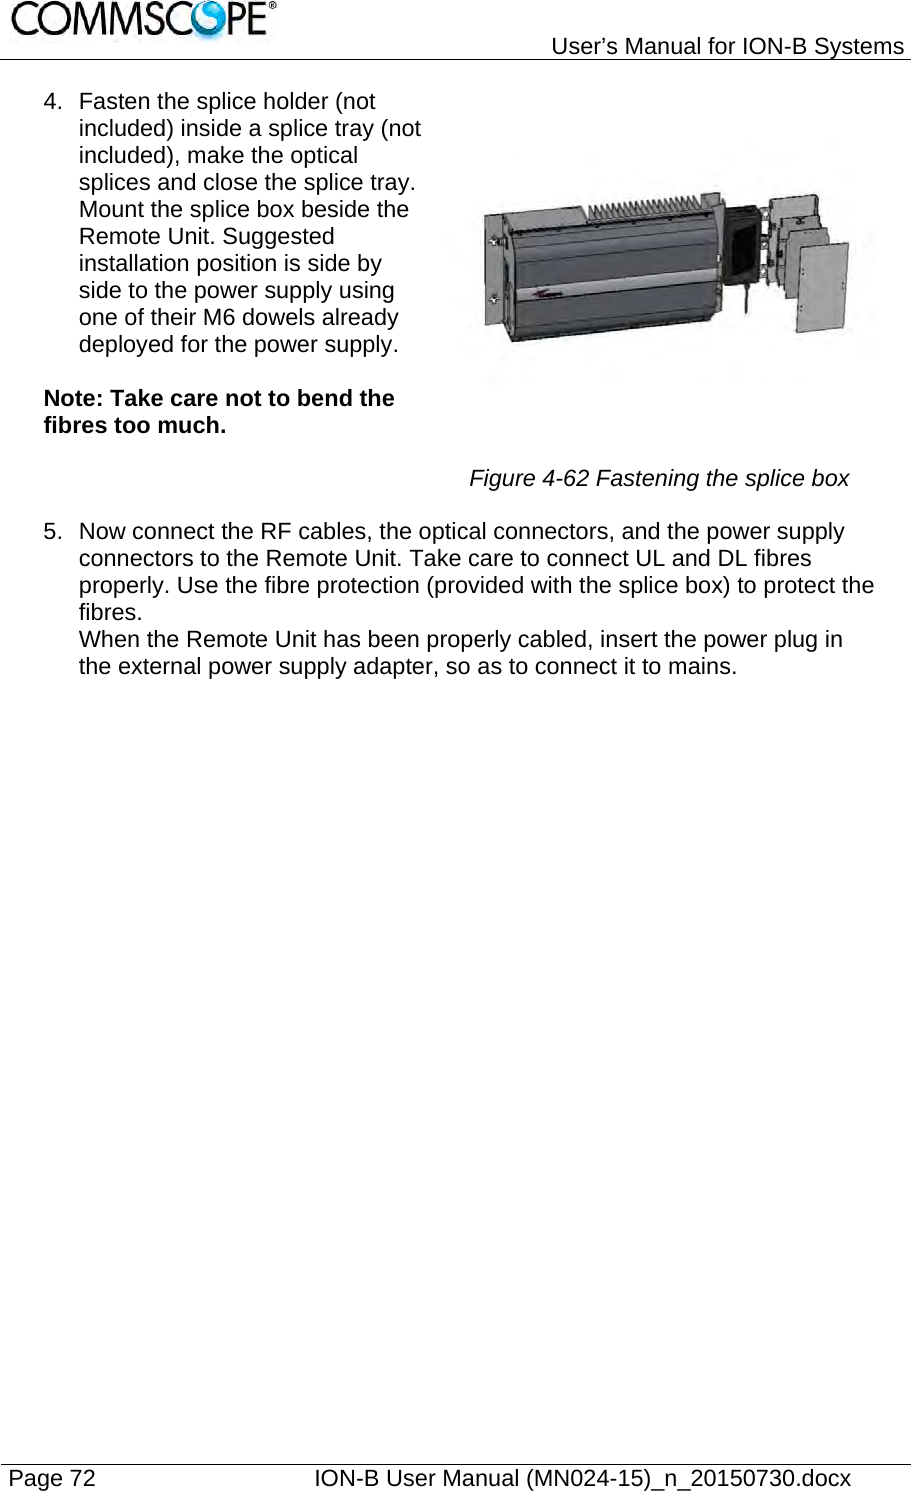   User’s Manual for ION-B Systems Page 72    ION-B User Manual (MN024-15)_n_20150730.docx  4.  Fasten the splice holder (not included) inside a splice tray (not included), make the optical splices and close the splice tray. Mount the splice box beside the Remote Unit. Suggested installation position is side by side to the power supply using one of their M6 dowels already deployed for the power supply.  Note: Take care not to bend the fibres too much.  Figure 4-62 Fastening the splice box 5.  Now connect the RF cables, the optical connectors, and the power supply connectors to the Remote Unit. Take care to connect UL and DL fibres properly. Use the fibre protection (provided with the splice box) to protect the fibres. When the Remote Unit has been properly cabled, insert the power plug in the external power supply adapter, so as to connect it to mains.    